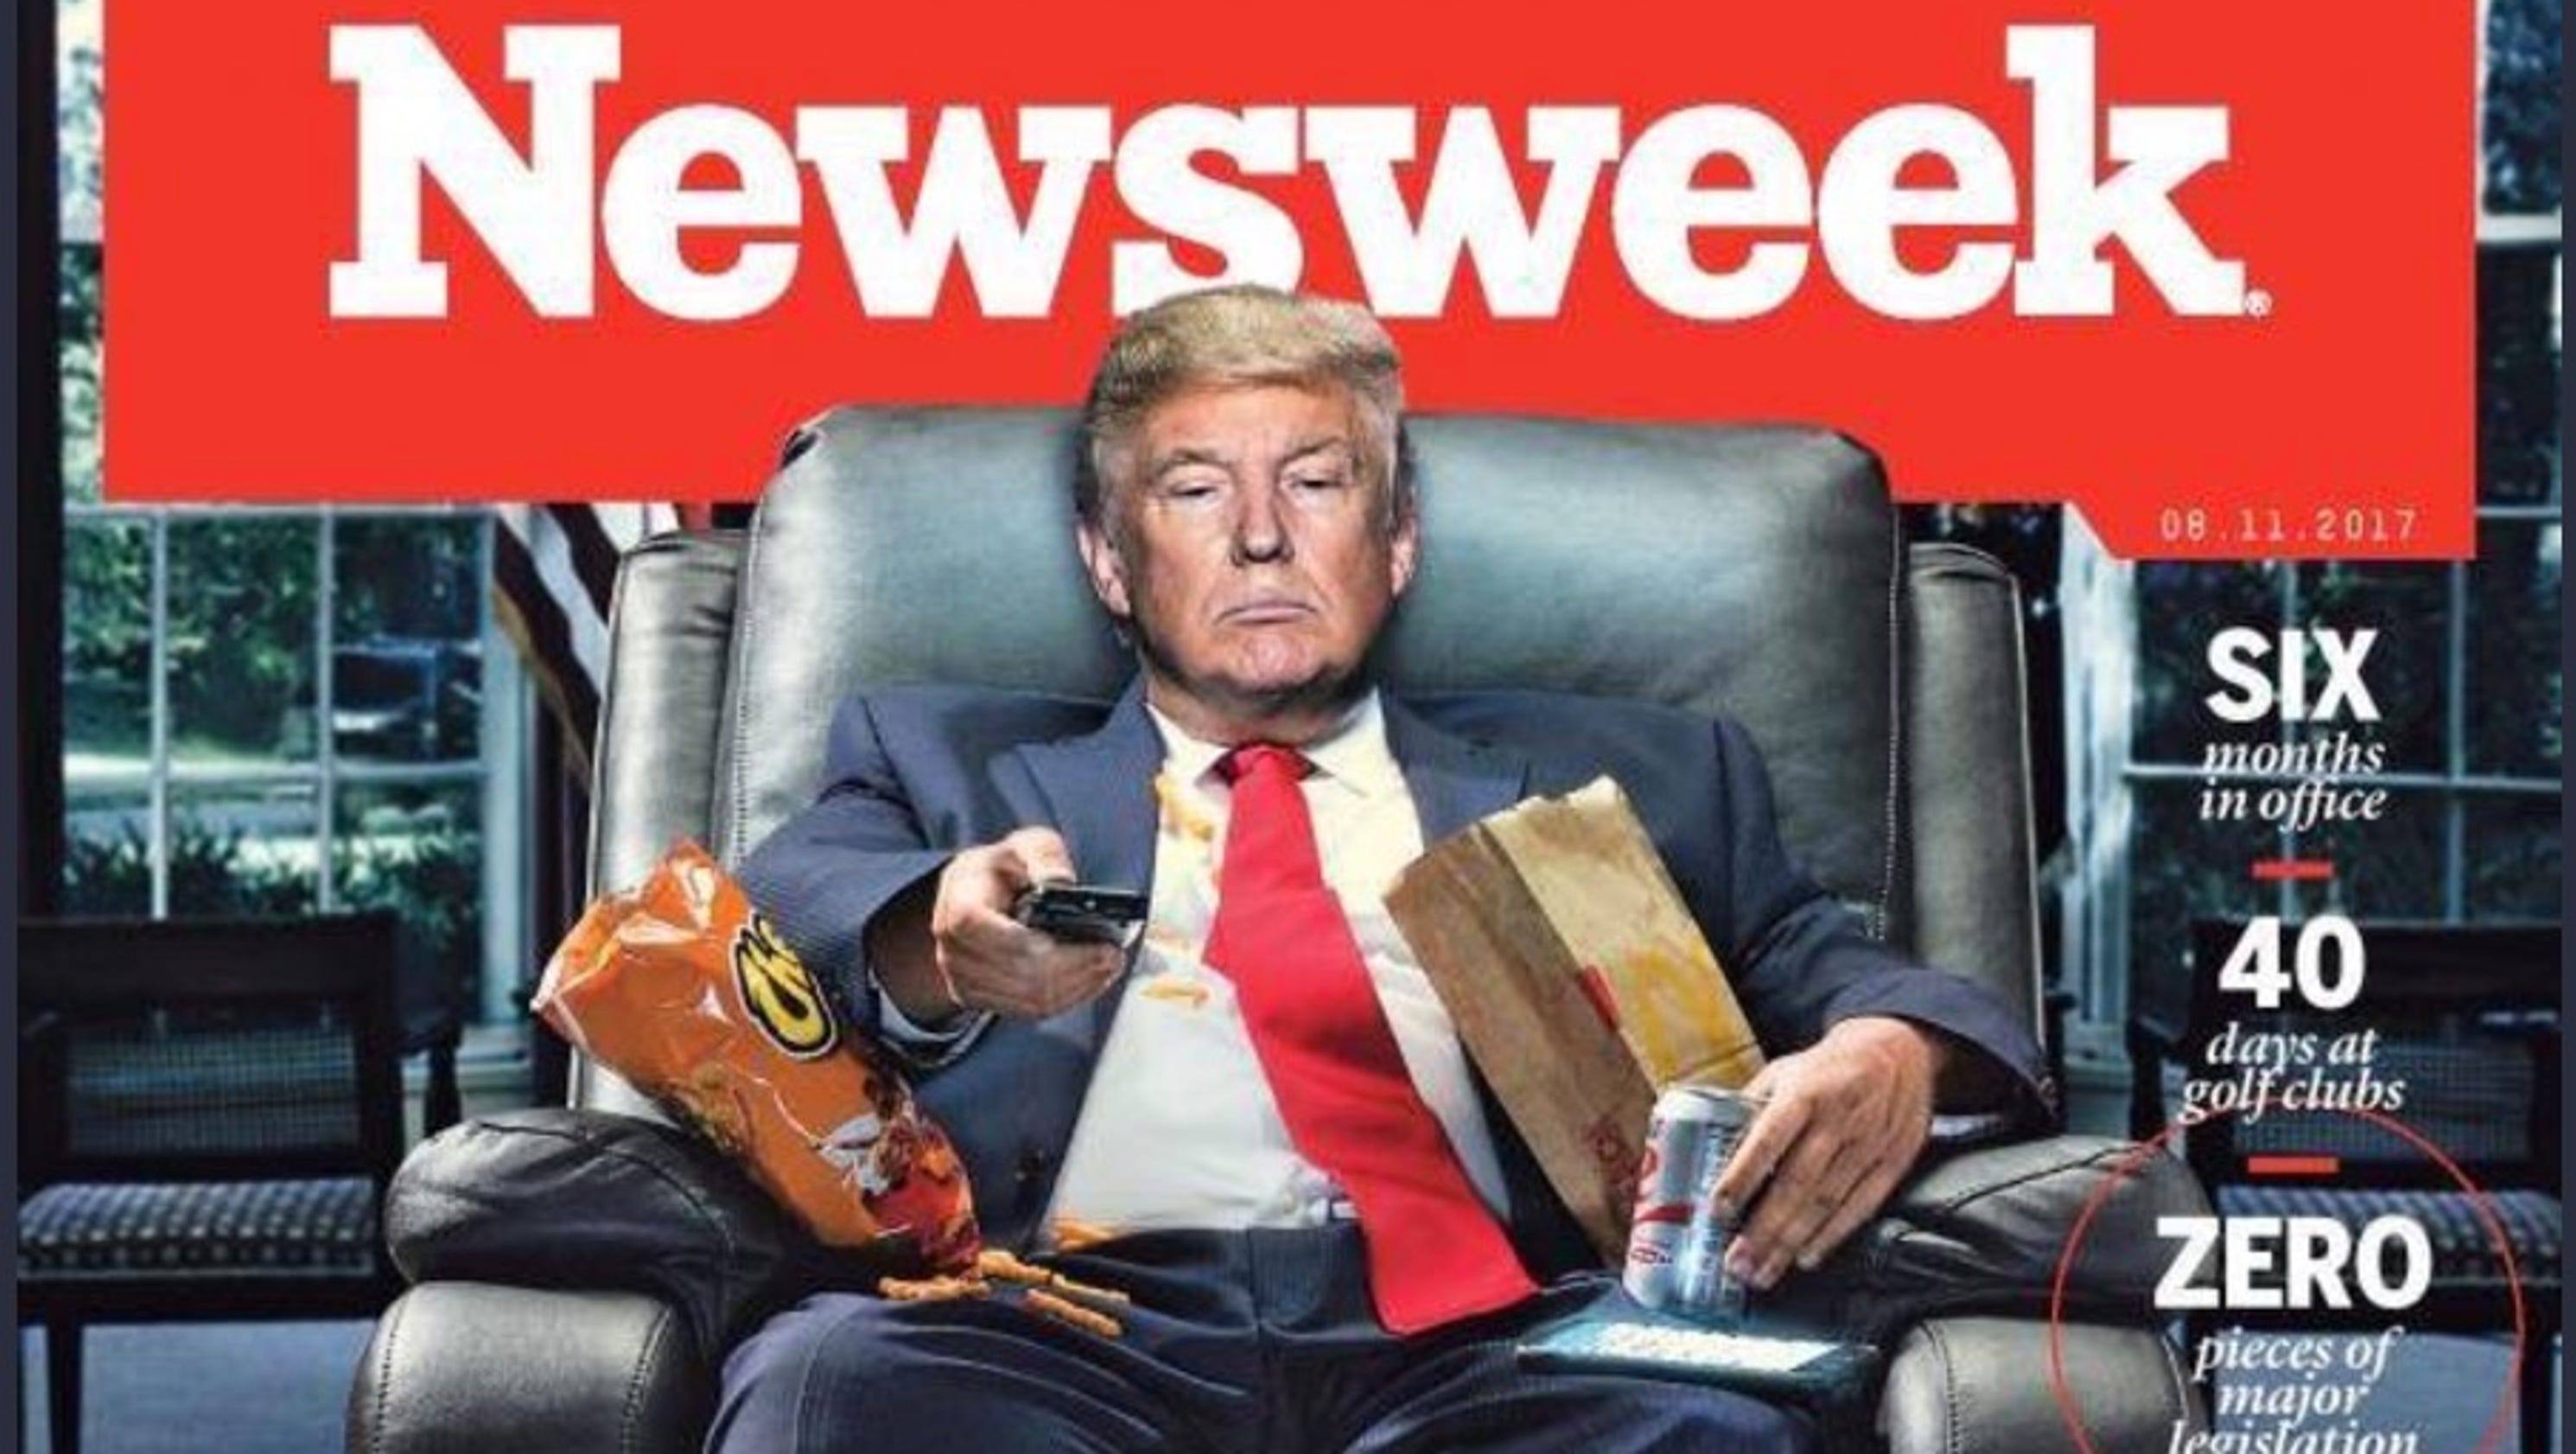 Newsweek calls President Trump a 'Lazy Boy' on its new cover